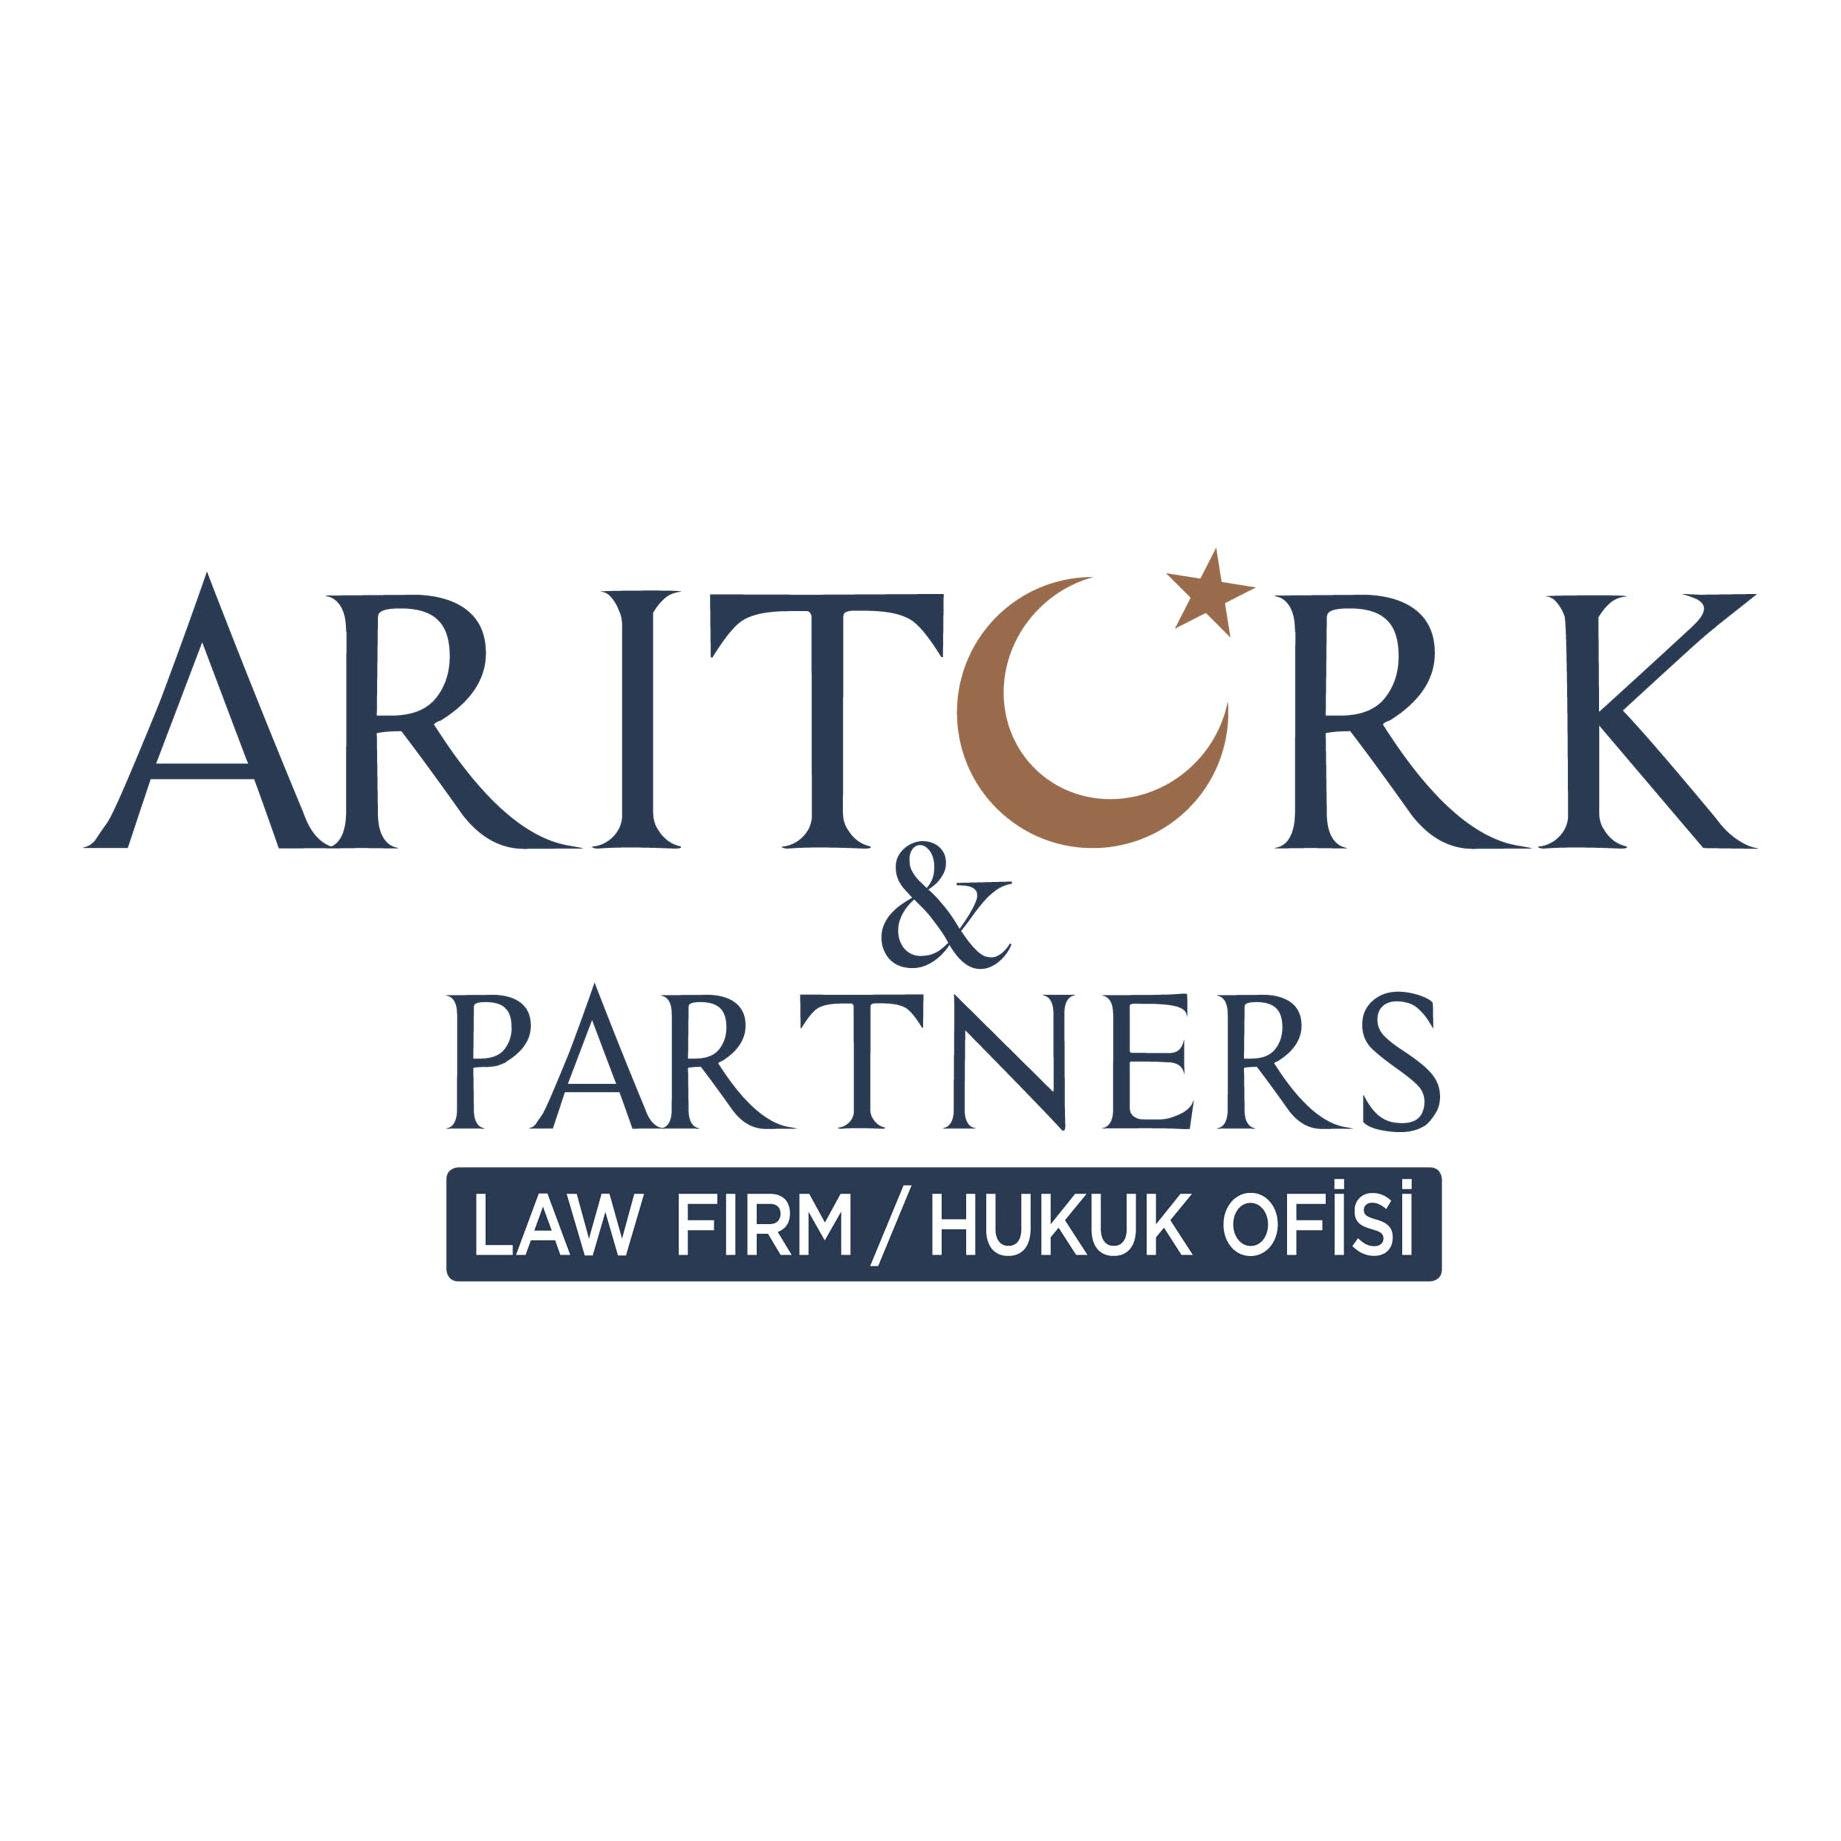 With more than 300 lawyers and professionals, Arıtürk & Partners is an Istanbul based international law firm, serving local and international clients.